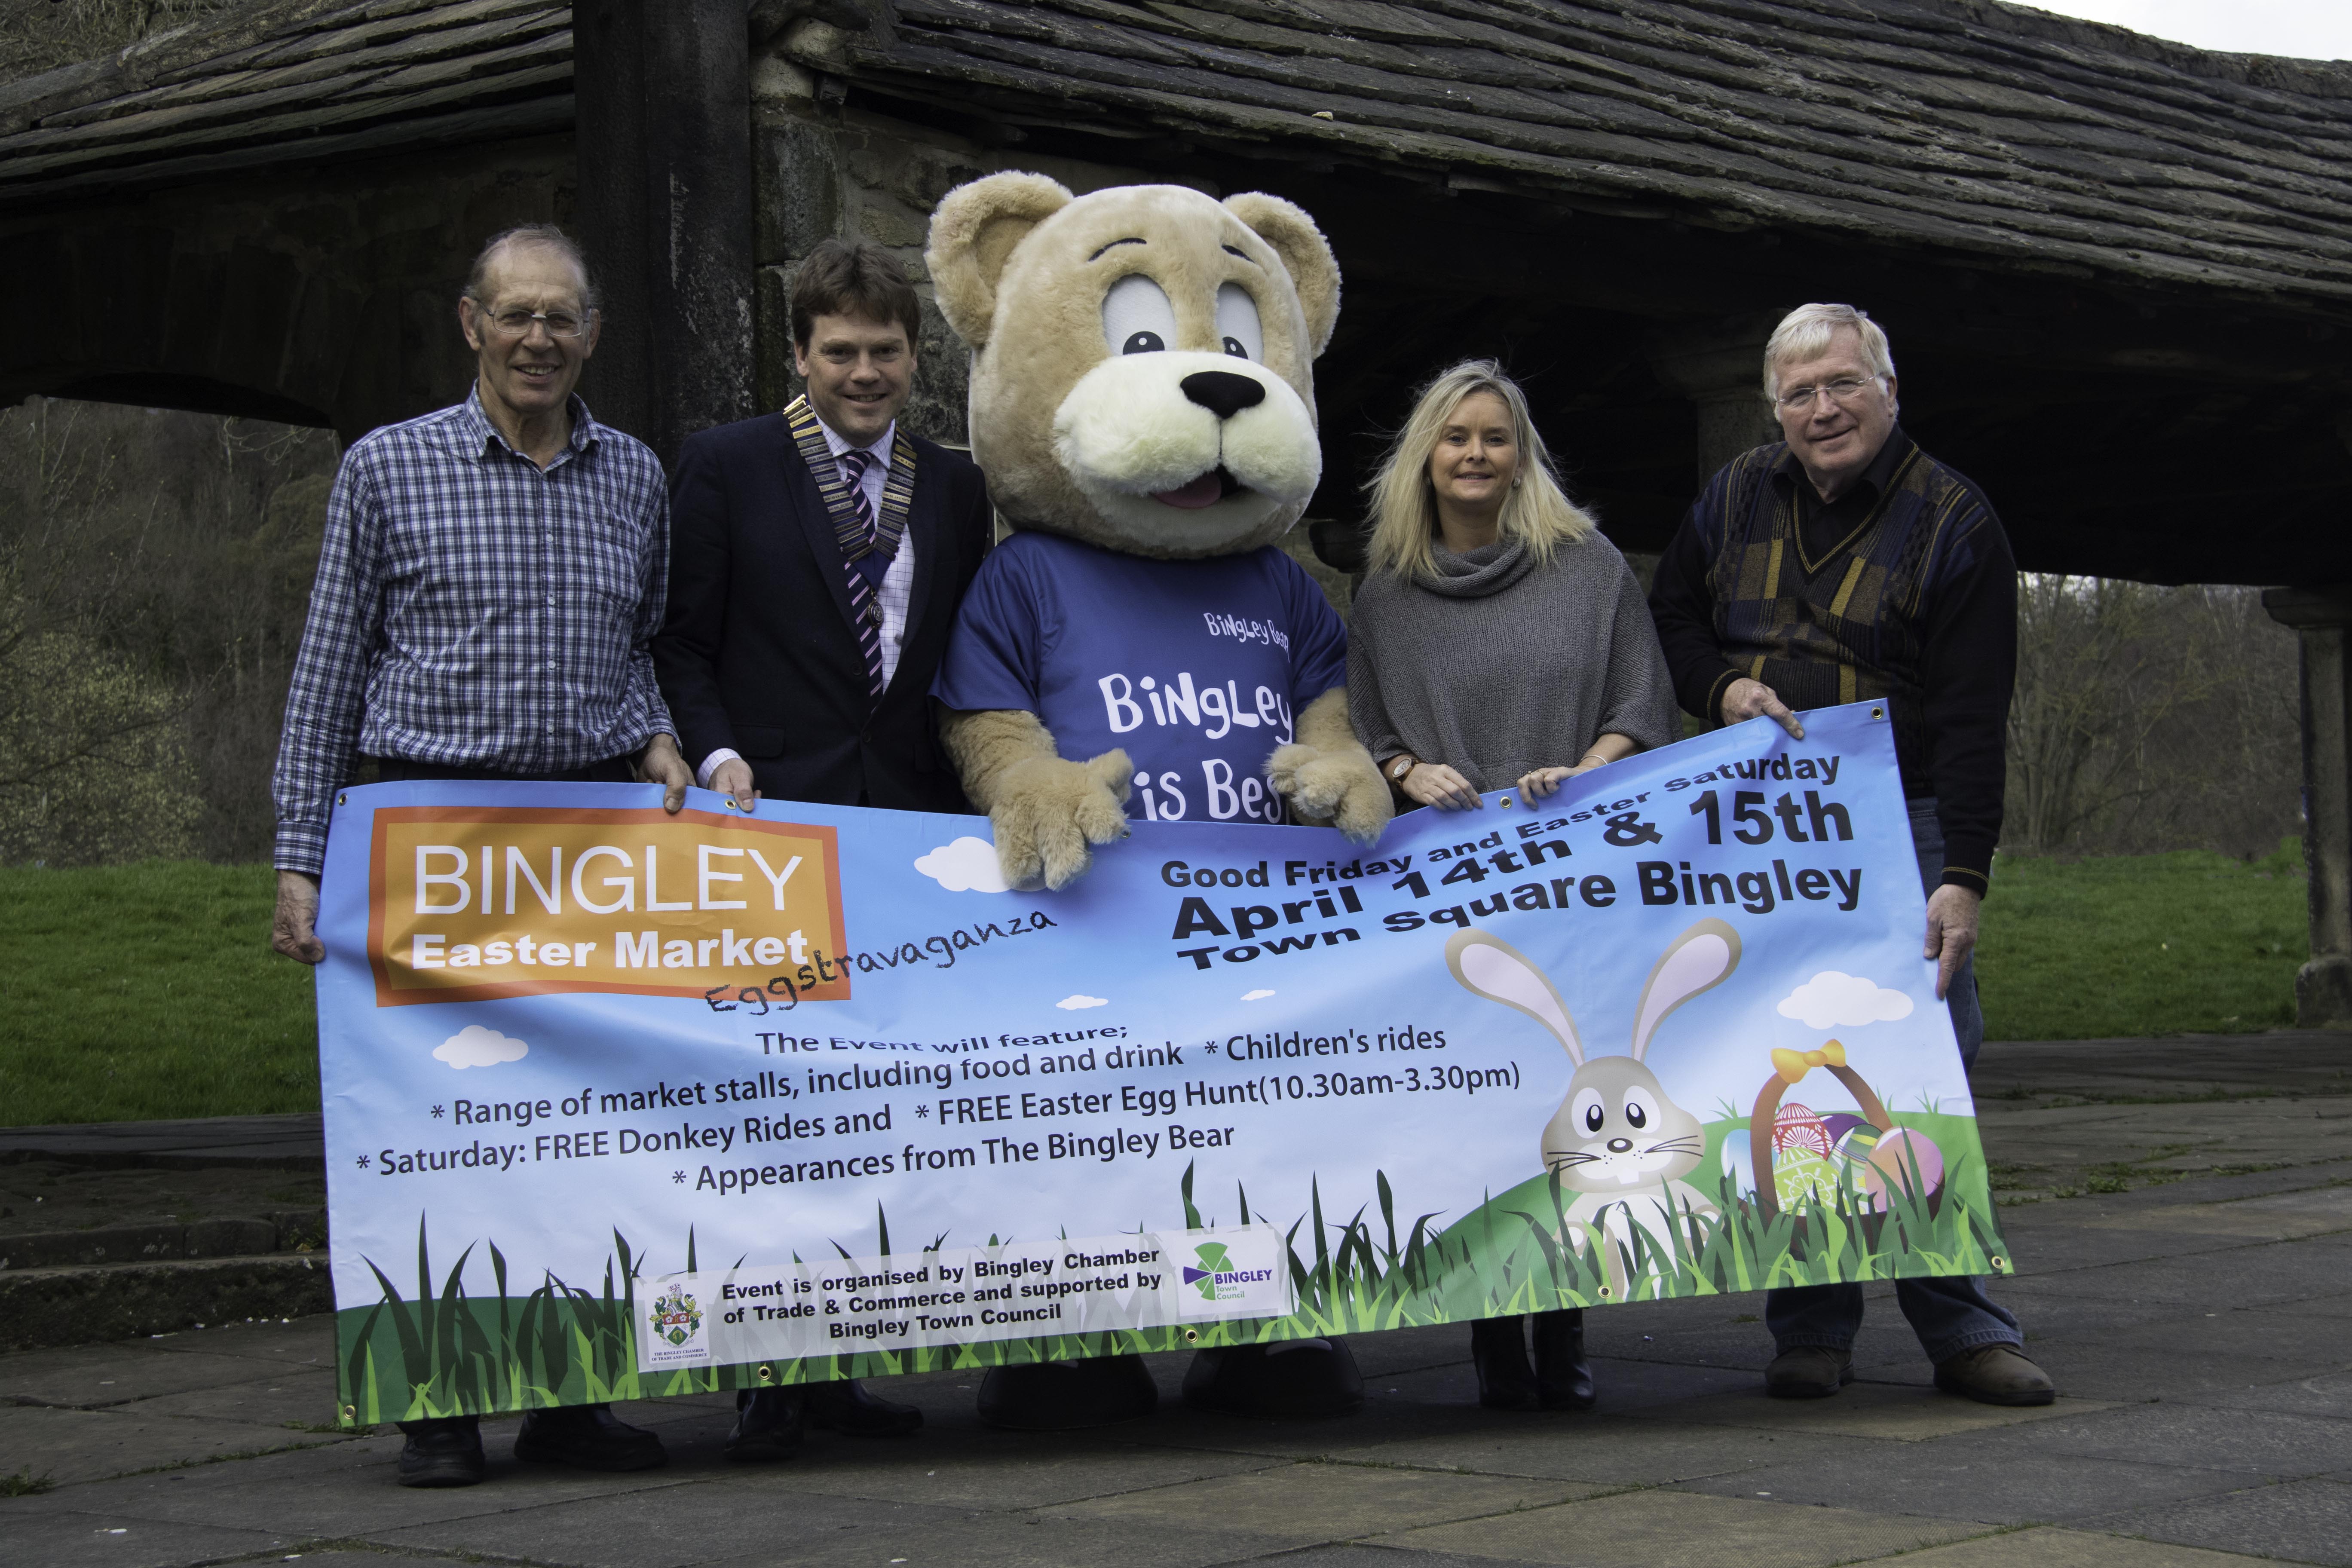 L to R: Cllr John Goode, Jamie Illingworth, President of Bingley Chamber of Trade and Commerce, Bingley Bear, Cllr Michelle Chapman and Cllr Mark Truelove with the banner promoting the Bingley Easter Market.